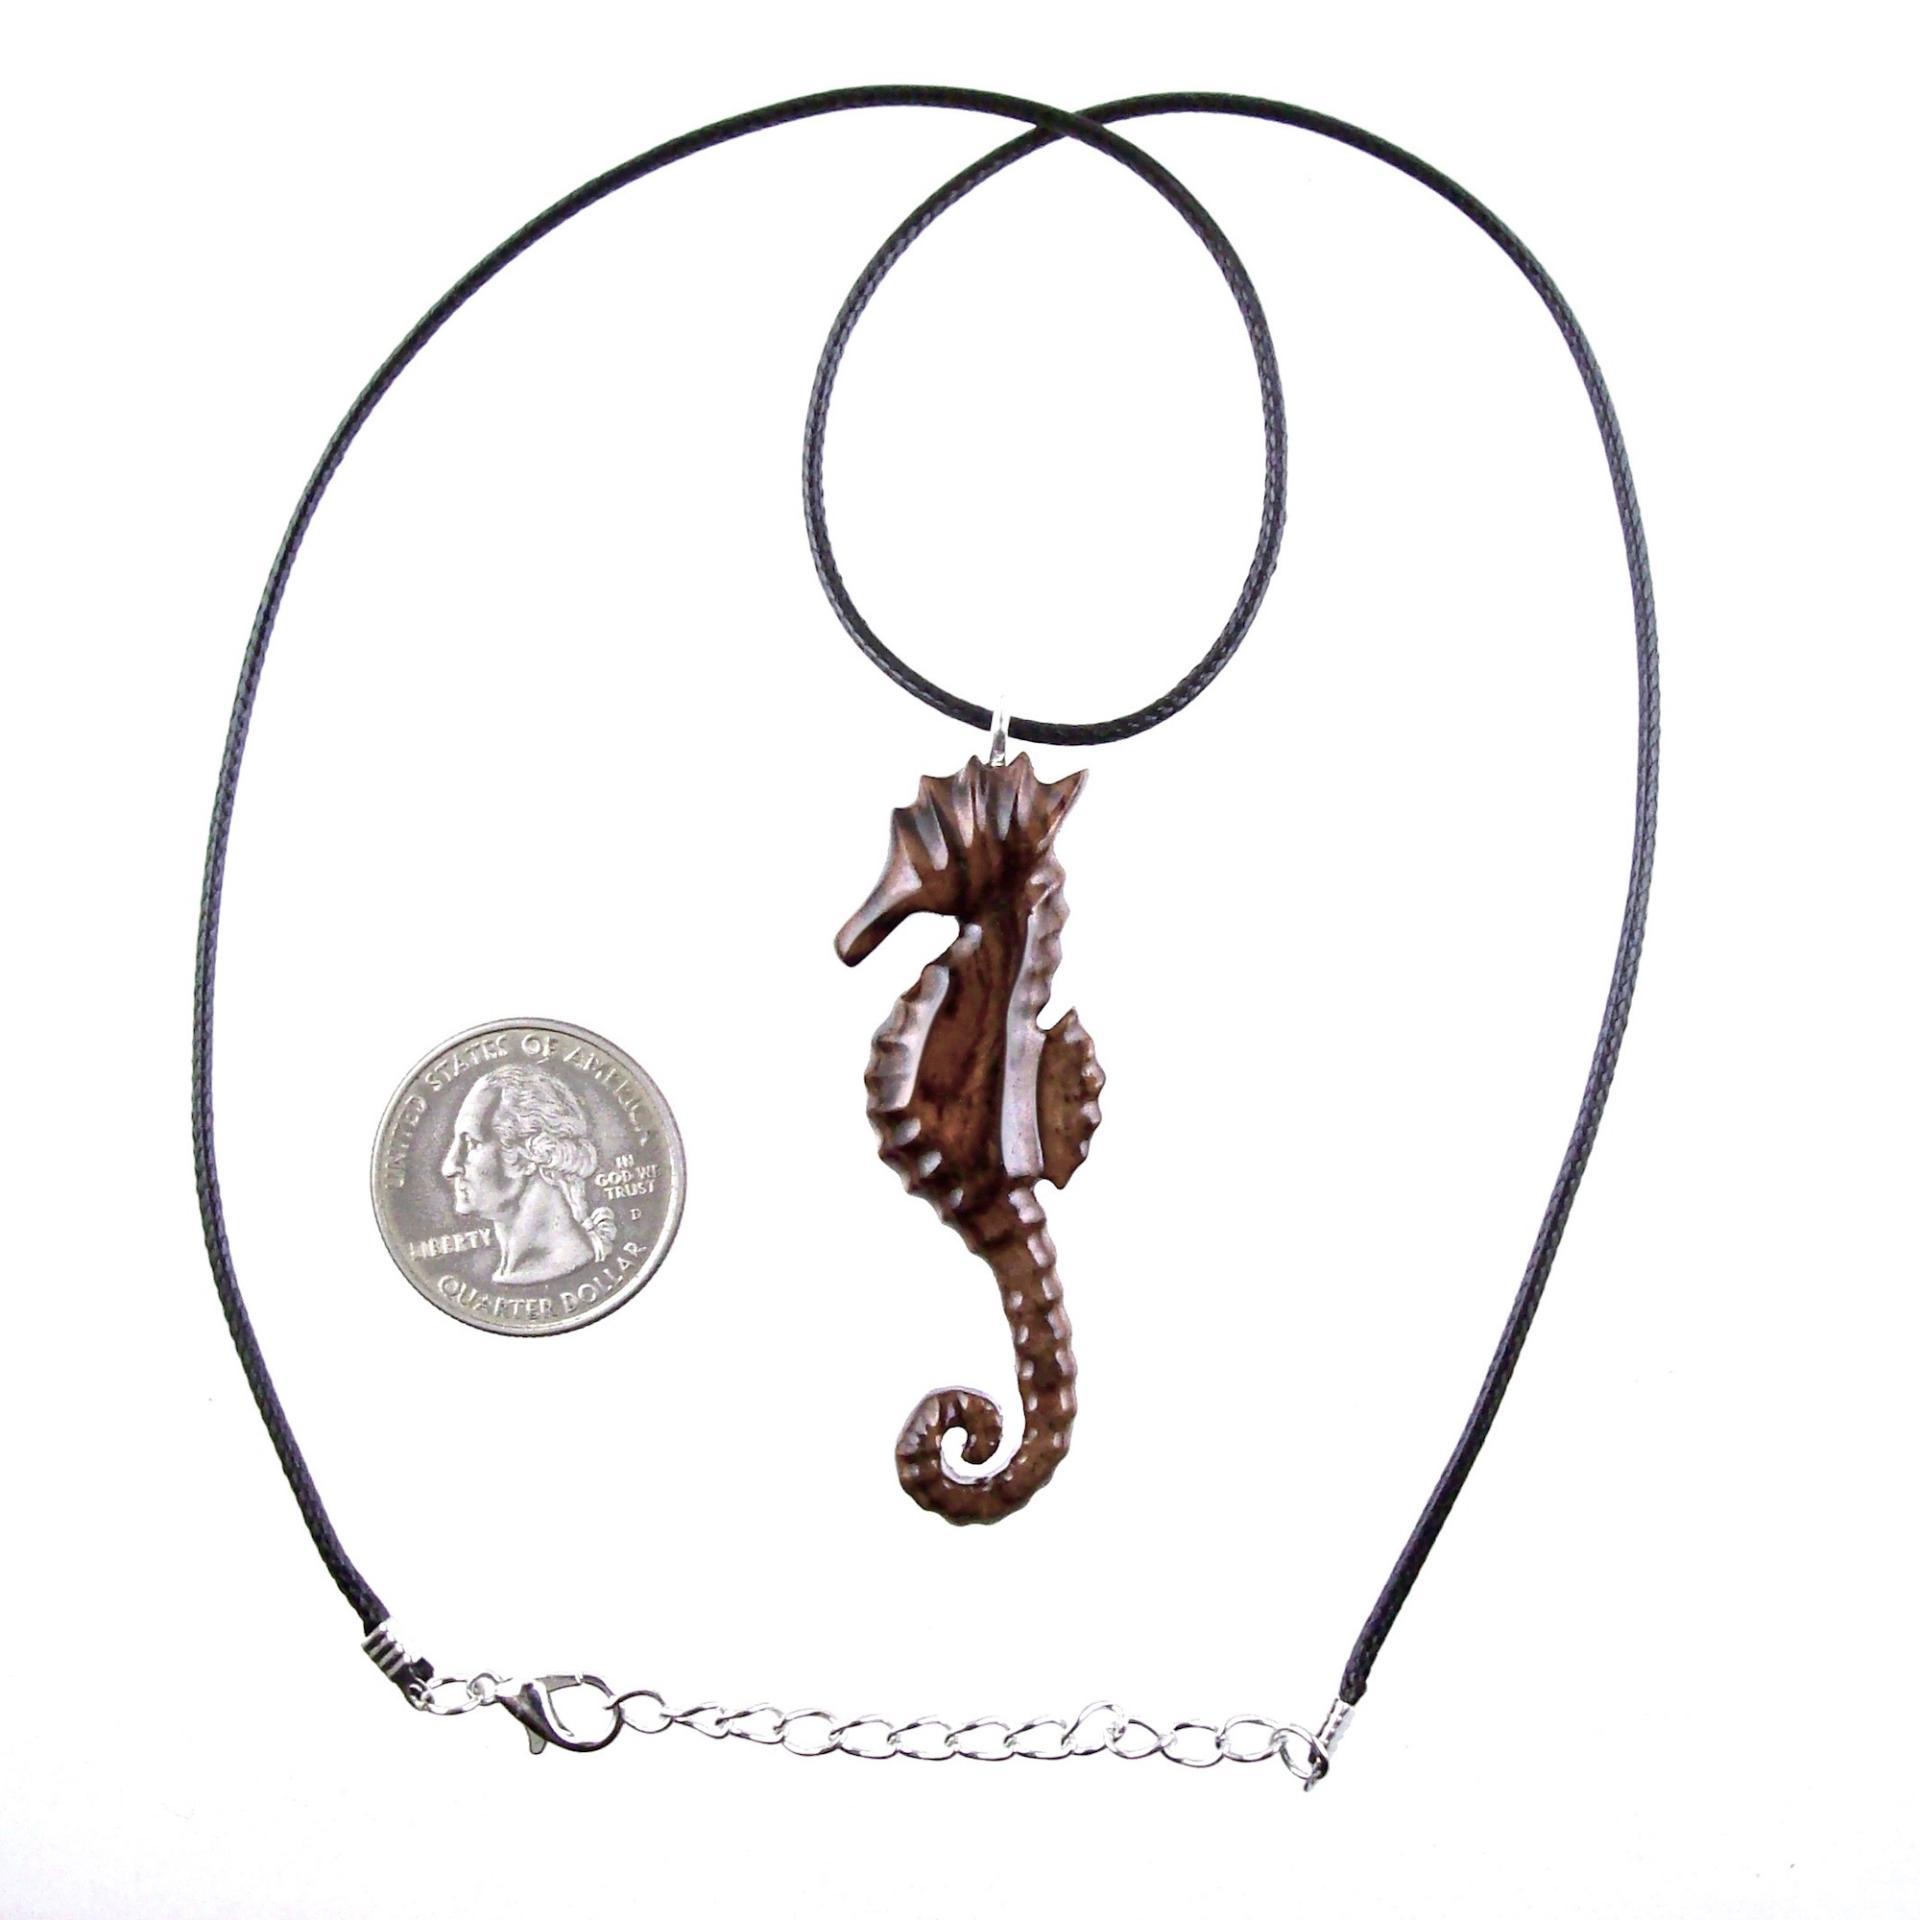 Wooden Seahorse Pendant, Hand Carved Seahorse Necklace for Men Women, Nautical Wood Jewelry, Sea Animal Beach Jewelry